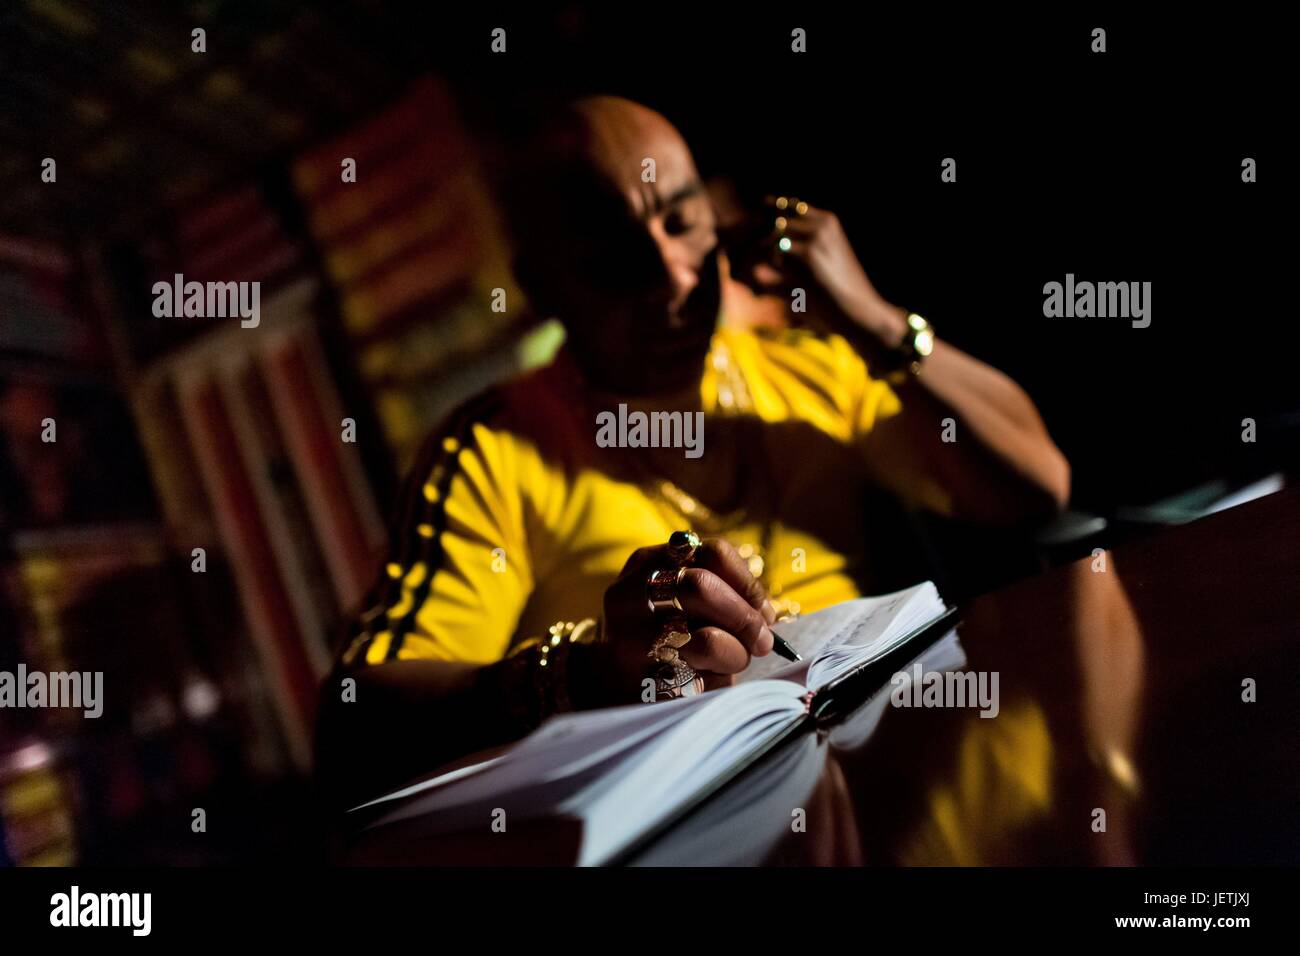 Ramiro Lopez, a Colombian ‚Äòbrujo‚Äô calling himself Shaman Llanero, provides spiritual consultation over the phone in his office in Bogota, Colombia, 29 June 2013. During the last decade, the religious globalization of the urban areas in Latin Am | usage worldwide Stock Photo